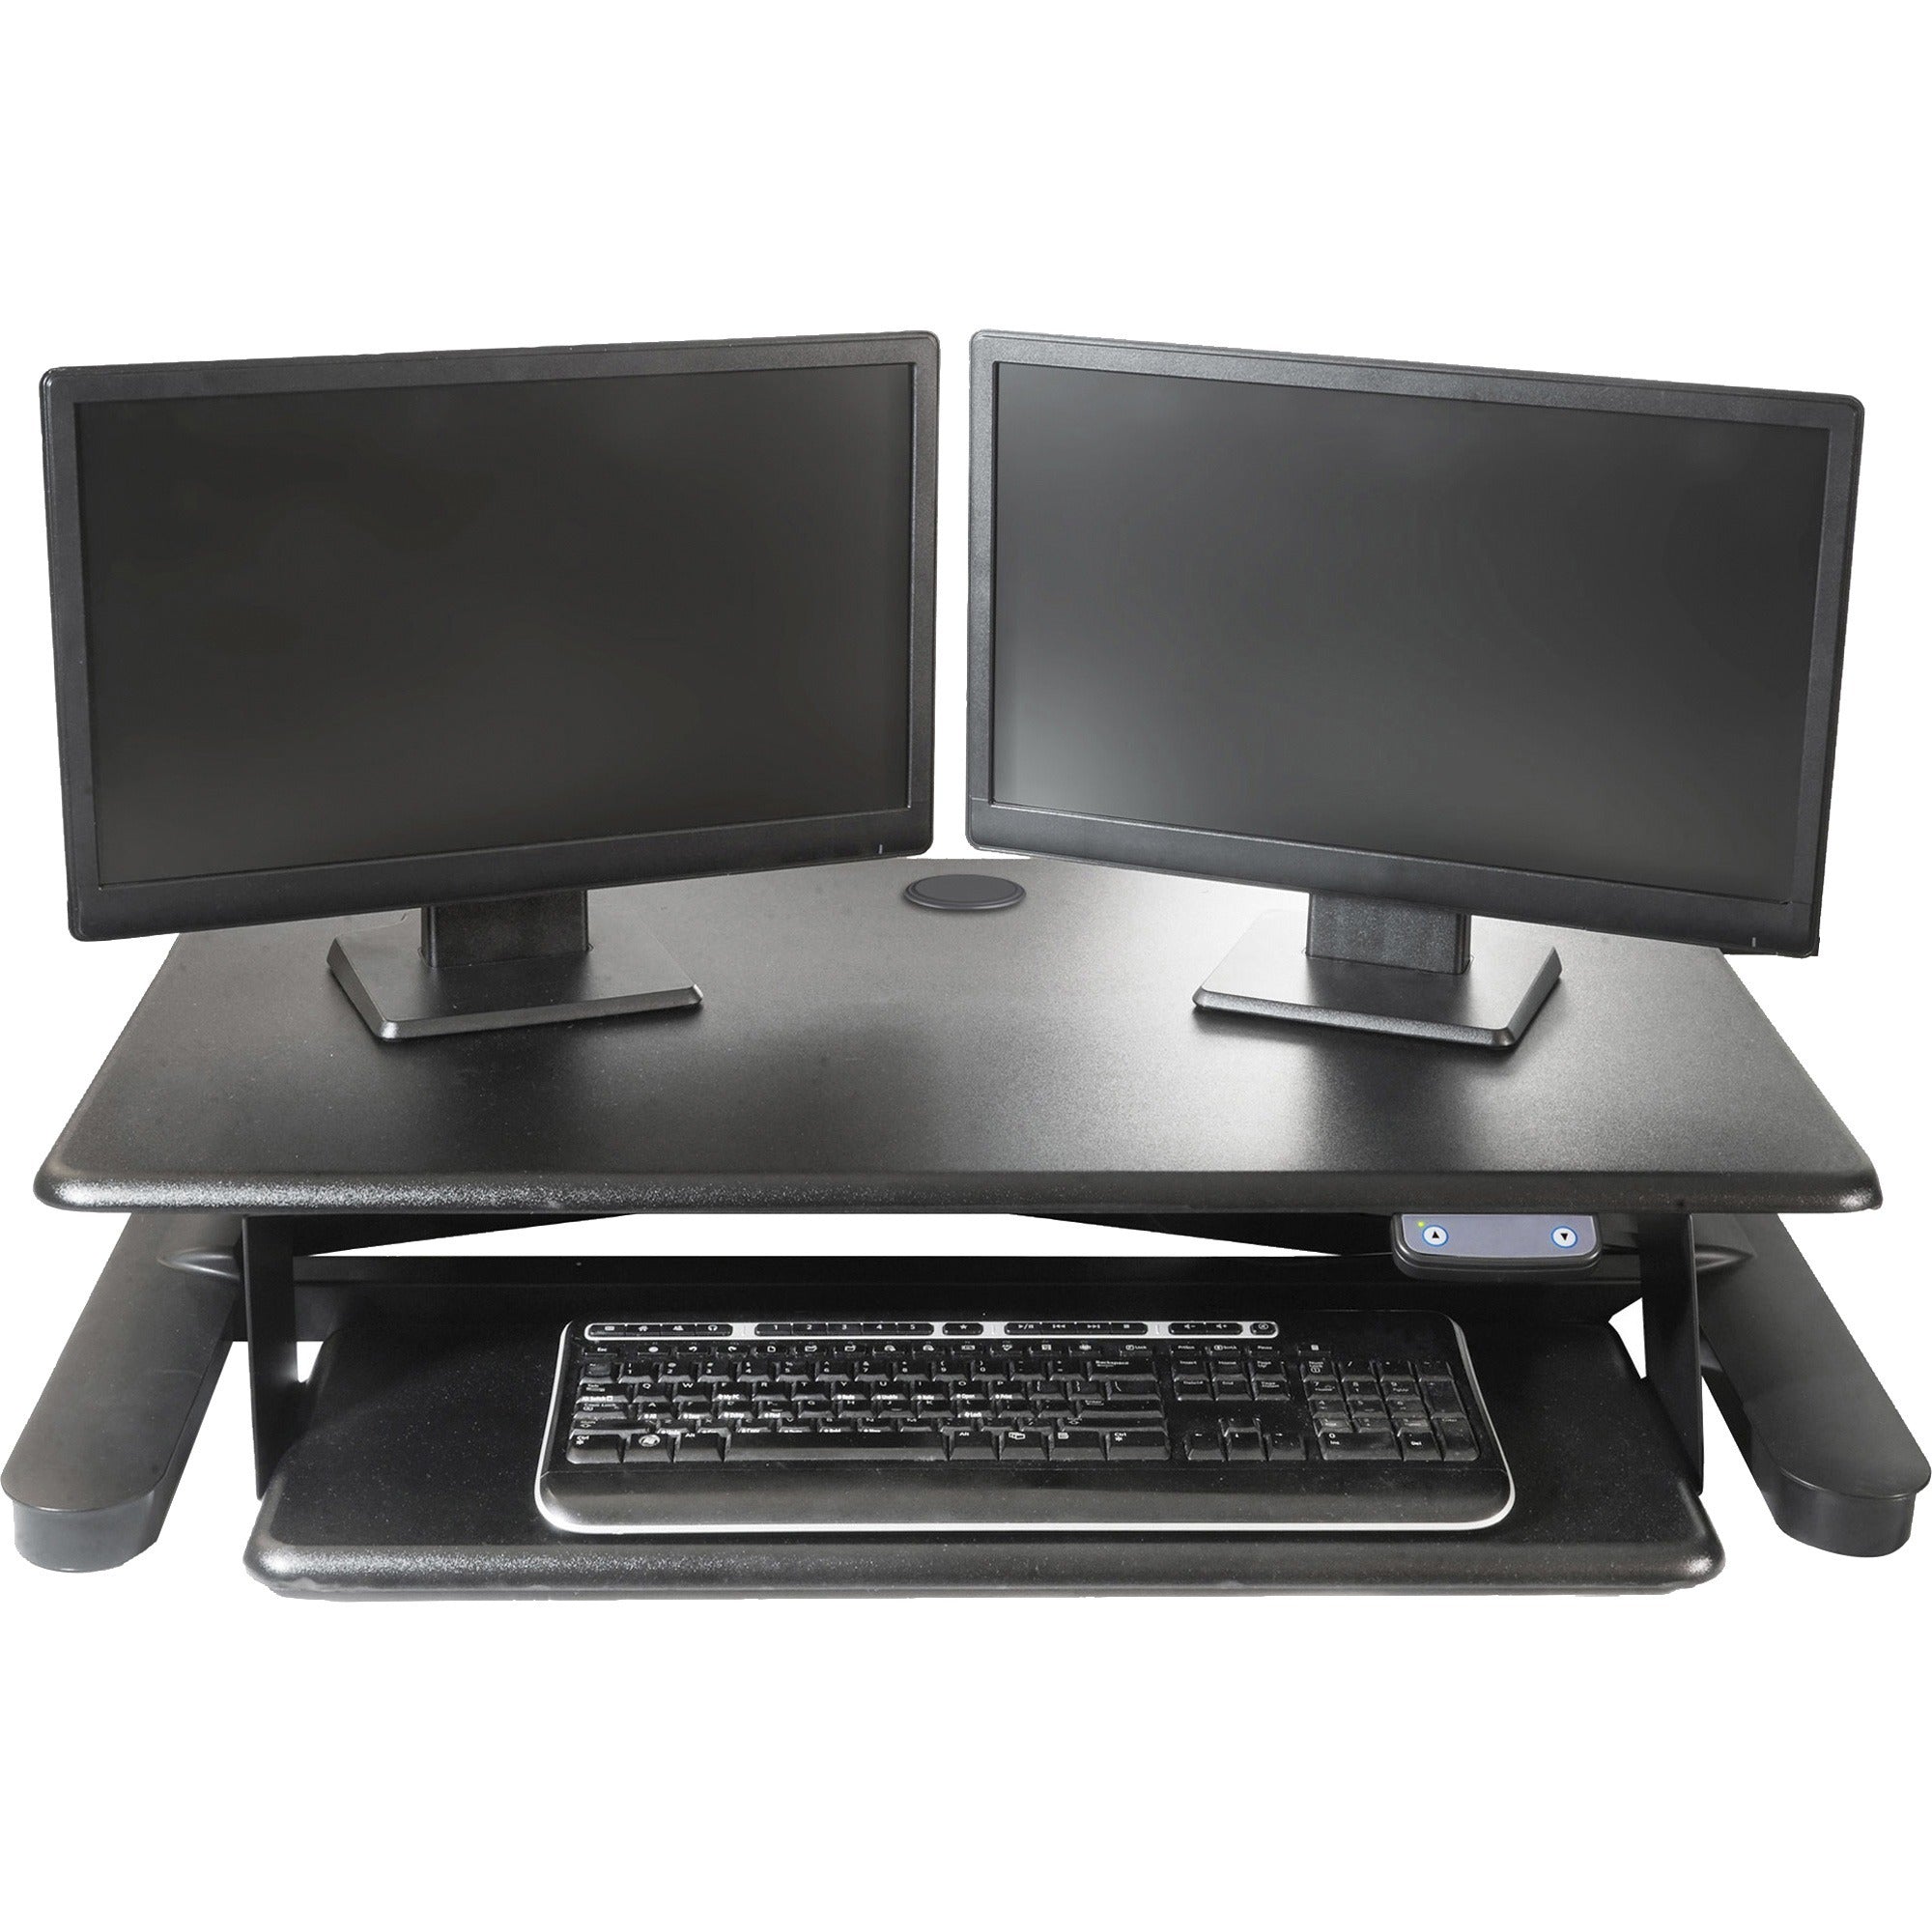 kantek-electric-sit-to-stand-workstation-up-to-24-screen-support-60-lb-load-capacity-234-height-x-35-width-x-26-depth-desktop-black_ktksts965 - 3